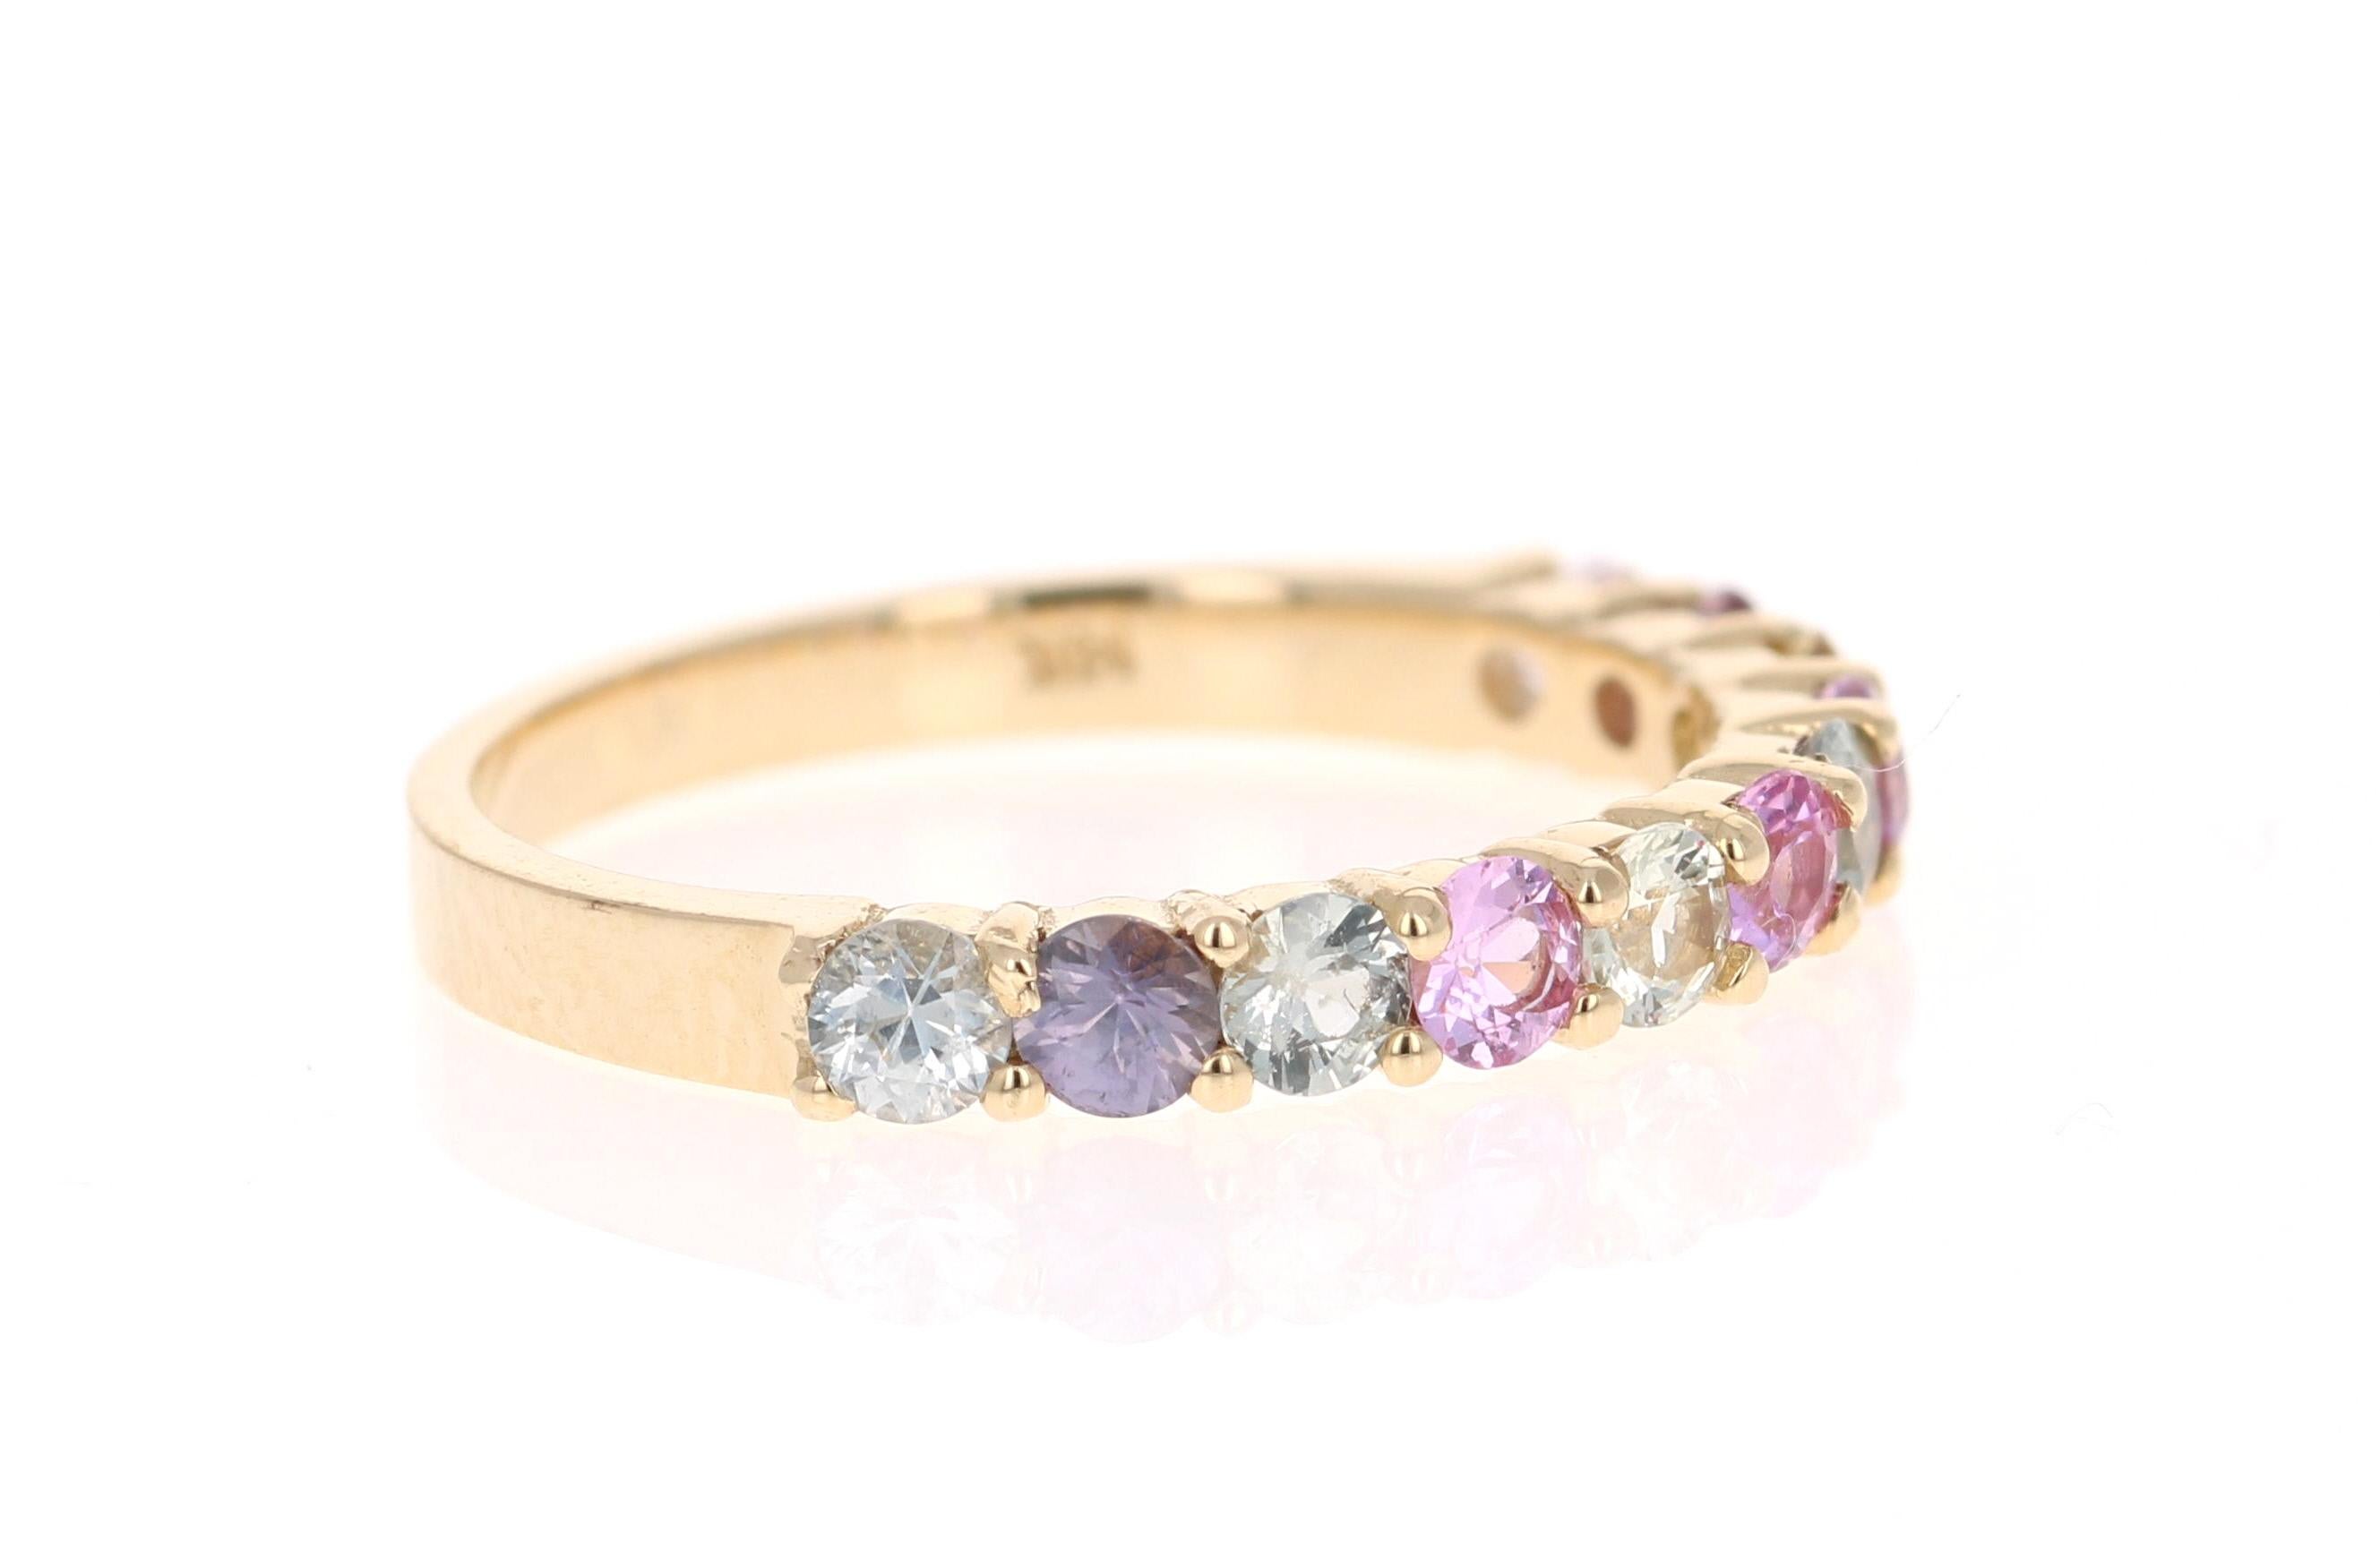 There are 11 Multicolored Natural Sapphires in this band that weigh 1.35 Carats.  It is made in 14K Yellow Gold and weighs approximately 2.0 Grams.

The band is a size 7 and can be re-sized at no additional charge.

It is perfect for everyday wear